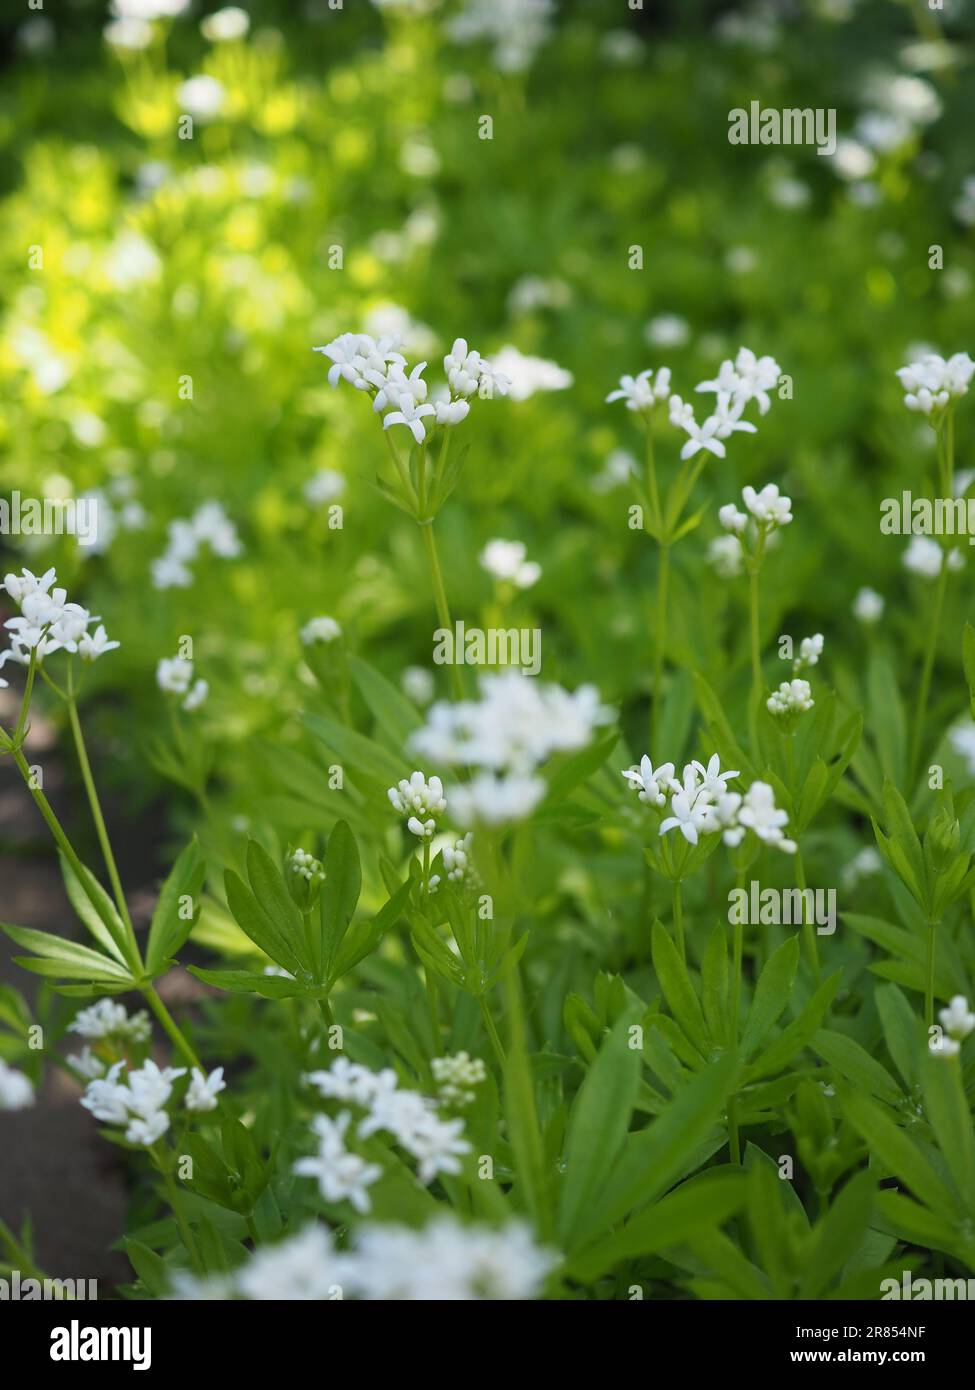 The sun dappled white flowers and green foliage of Galium odoratum (sweet woodruff or sweet scented bedstraw), a perennial ground cover plant Stock Photo